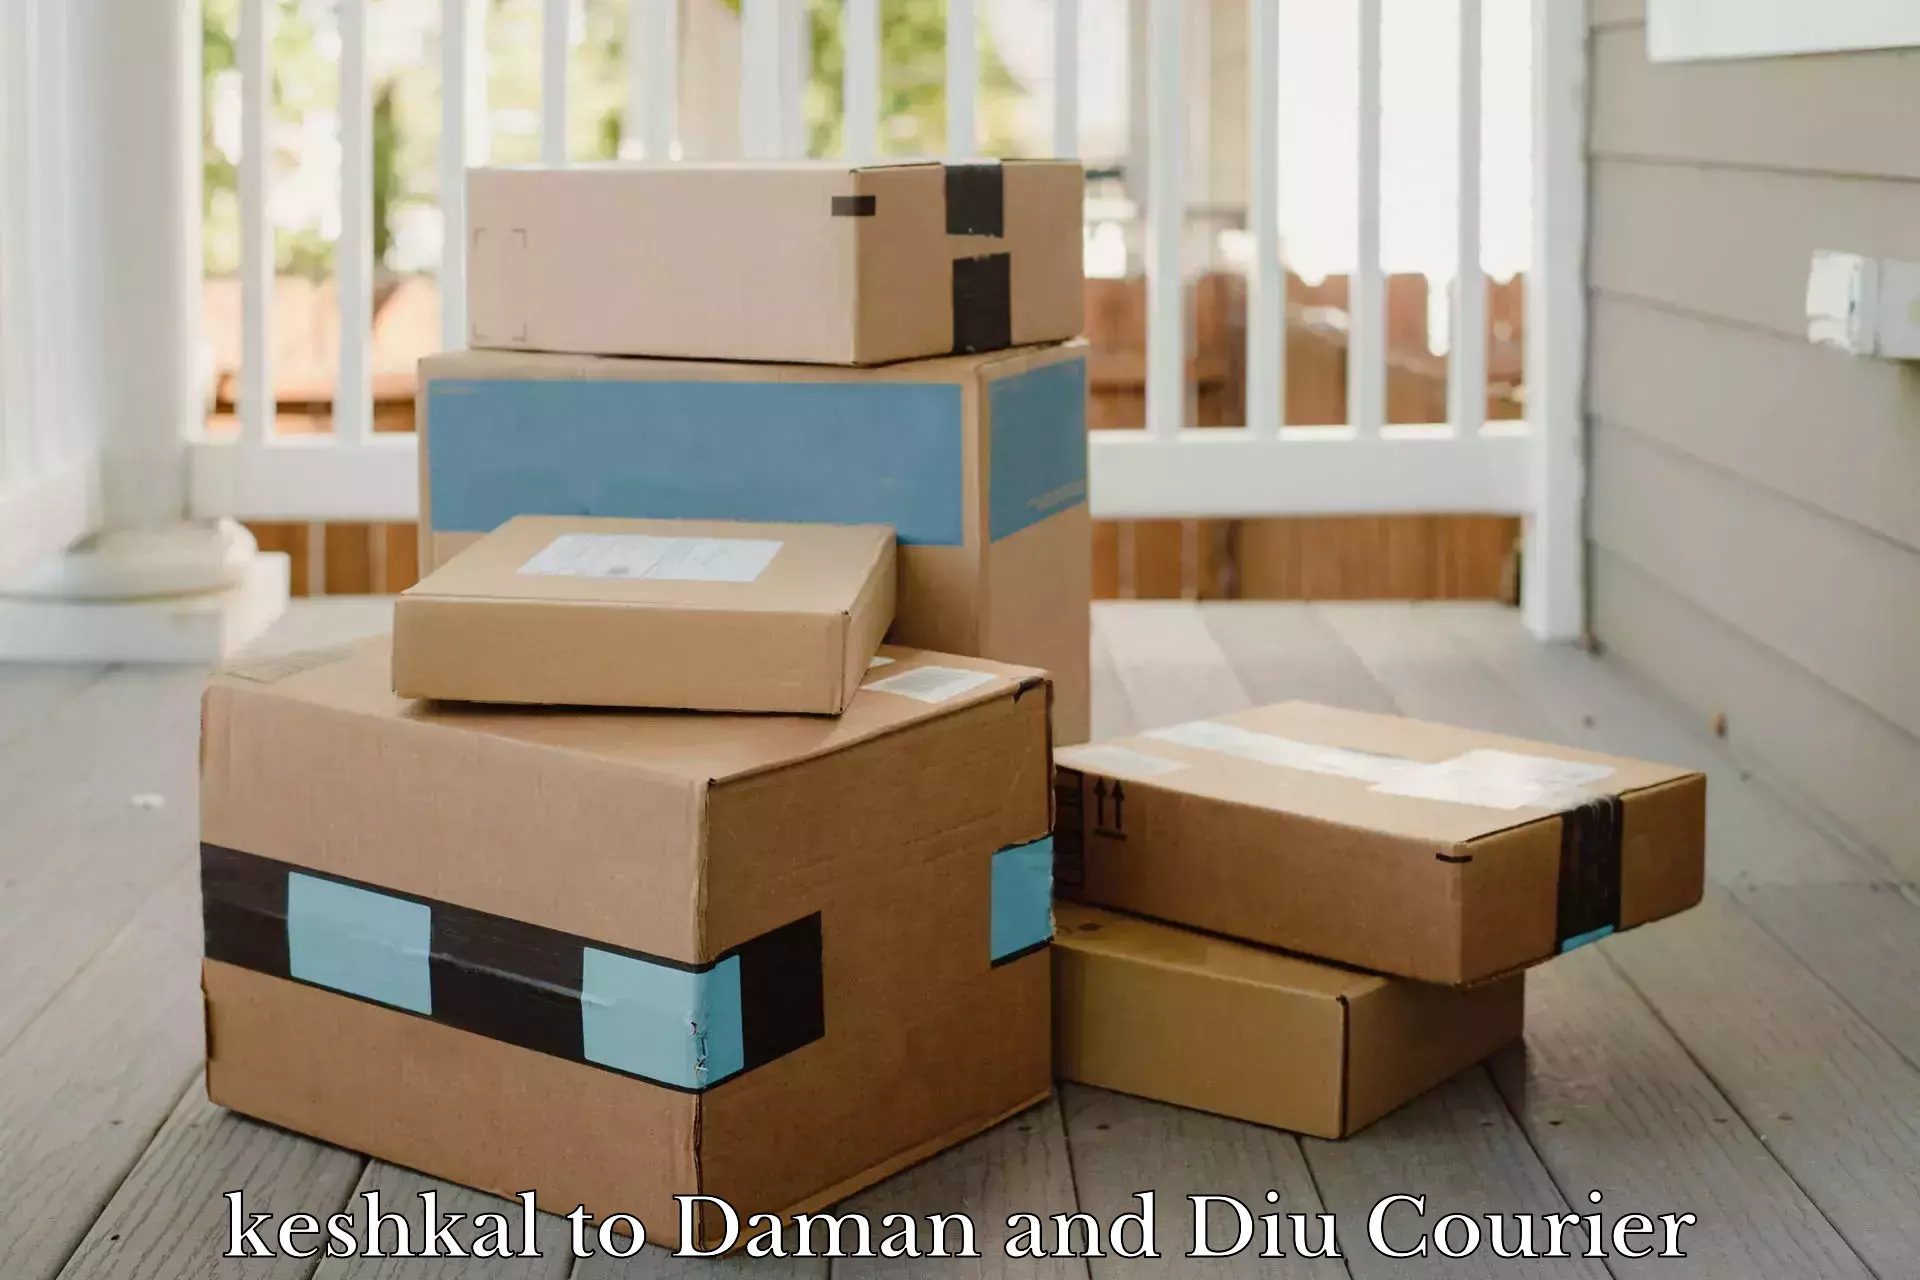 Affordable parcel service keshkal to Daman and Diu